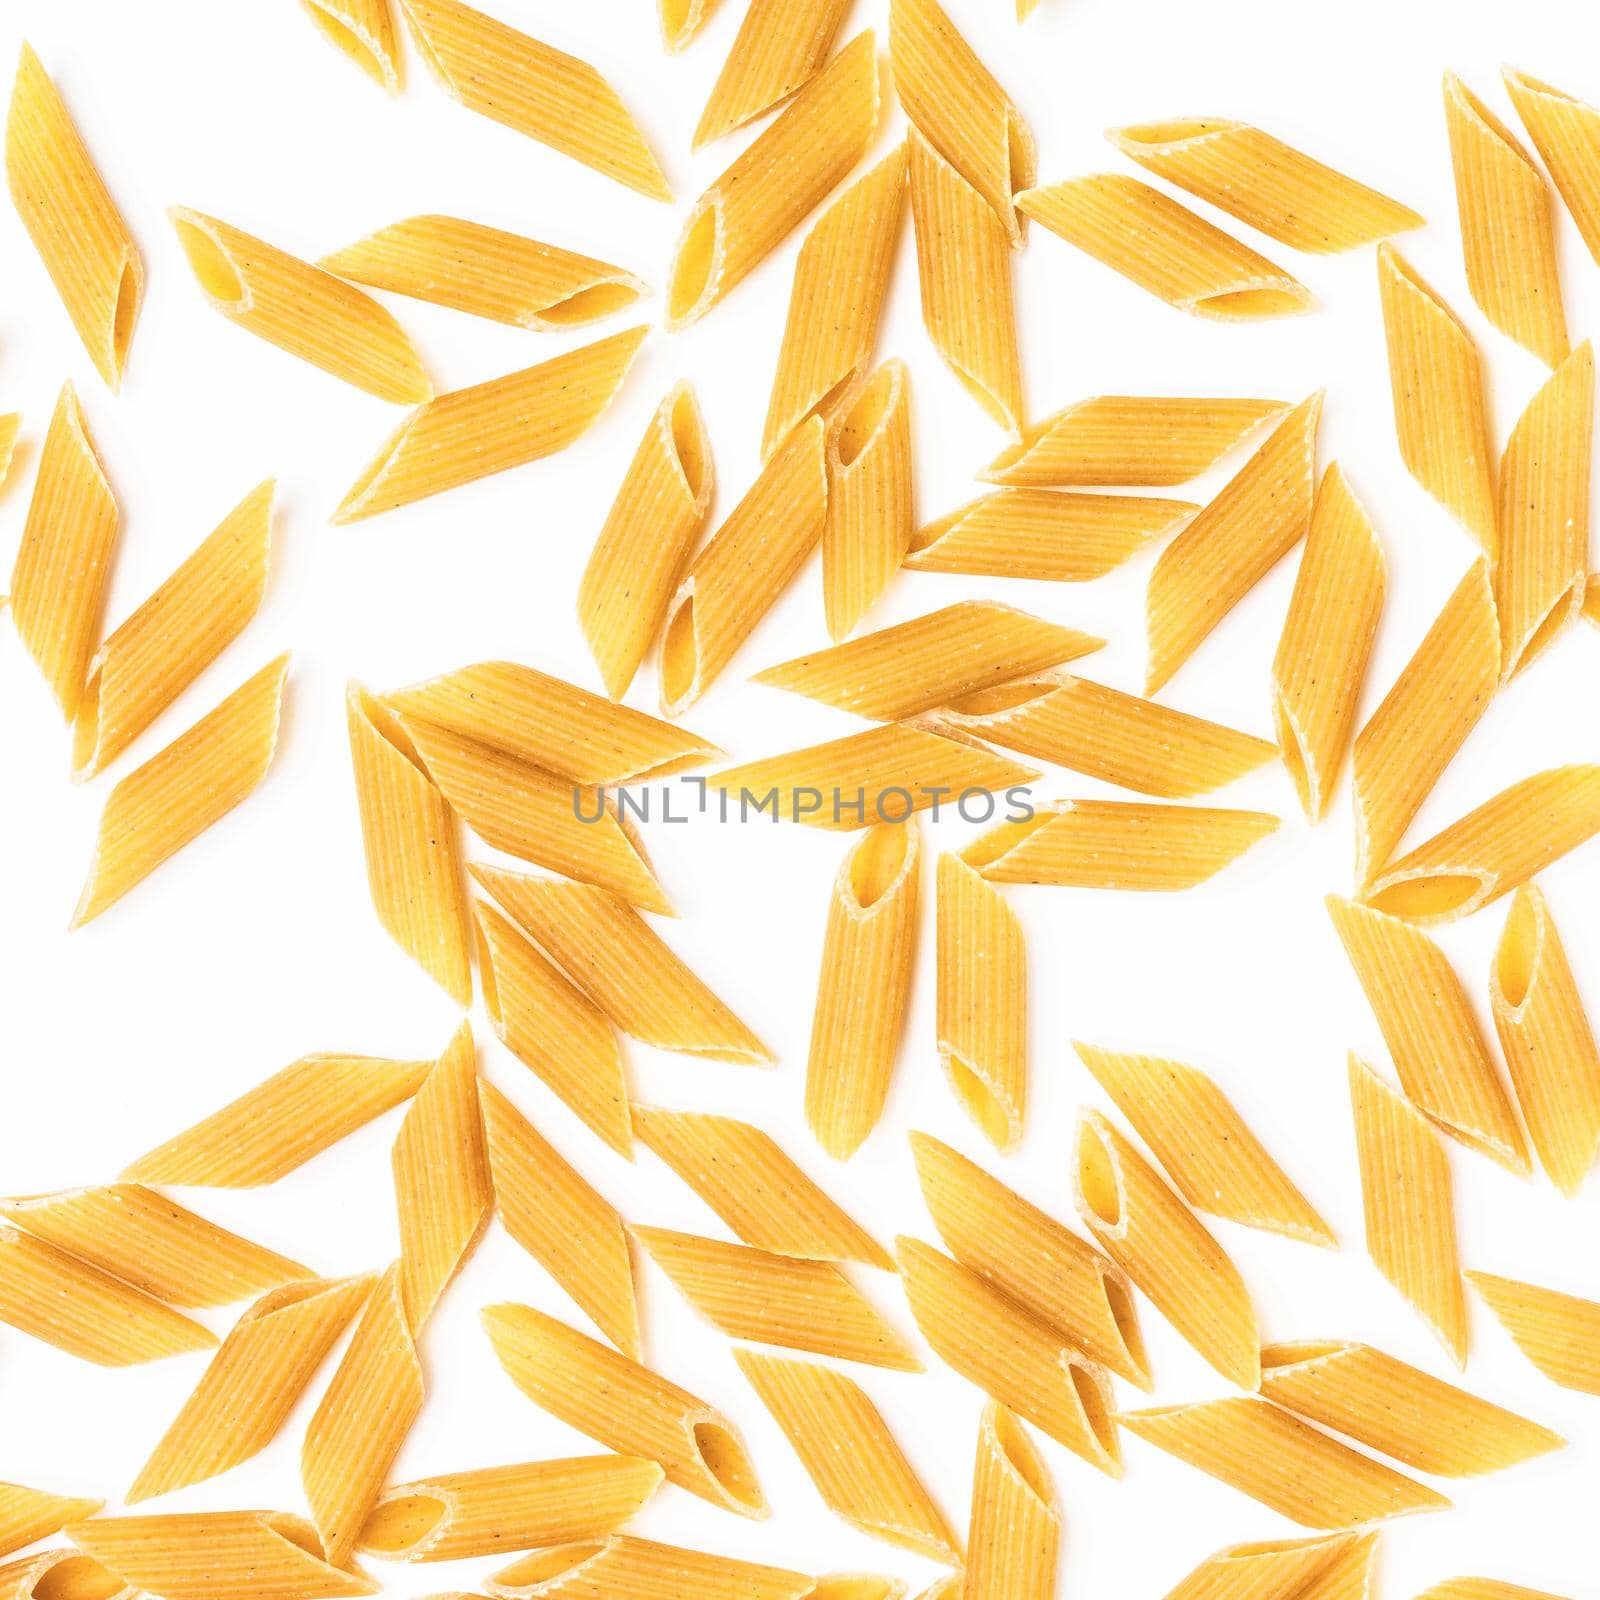 Penne rigate pasta. Pasta on white background. Dry penne rigate pasta isolated over white. Top view.